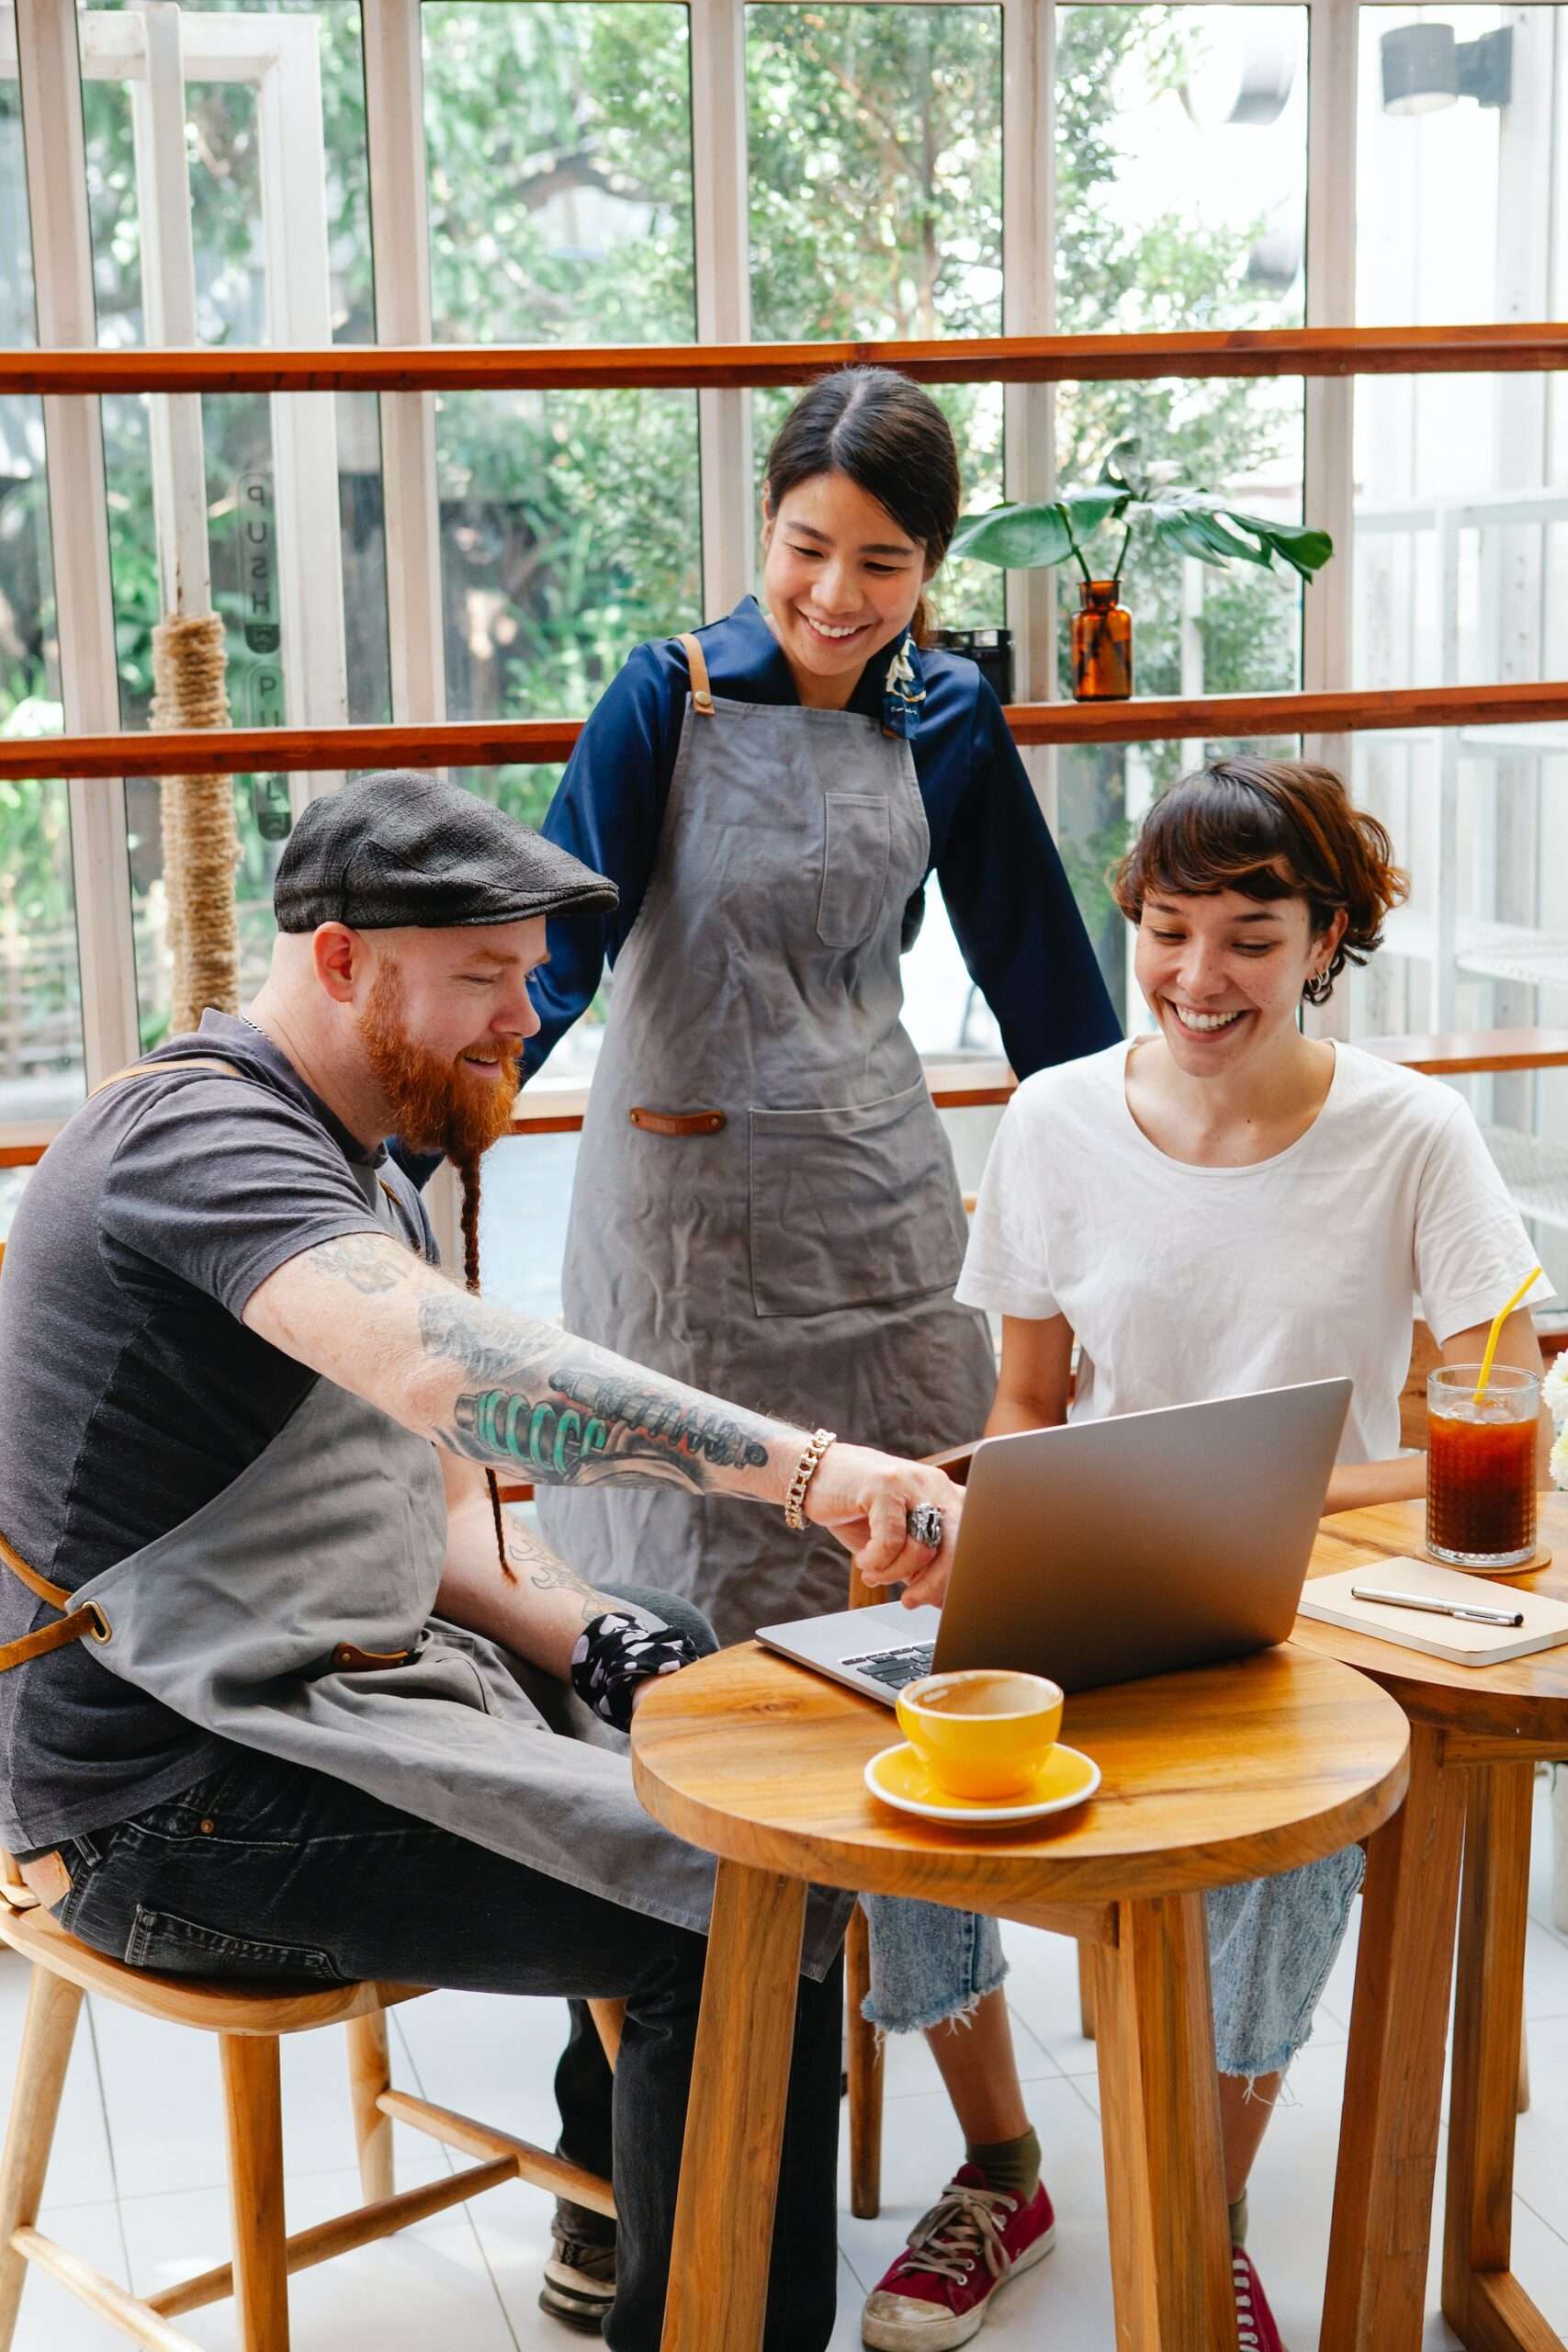 The image is of 3 persons, one man and two women, talking in front of a laptop. 